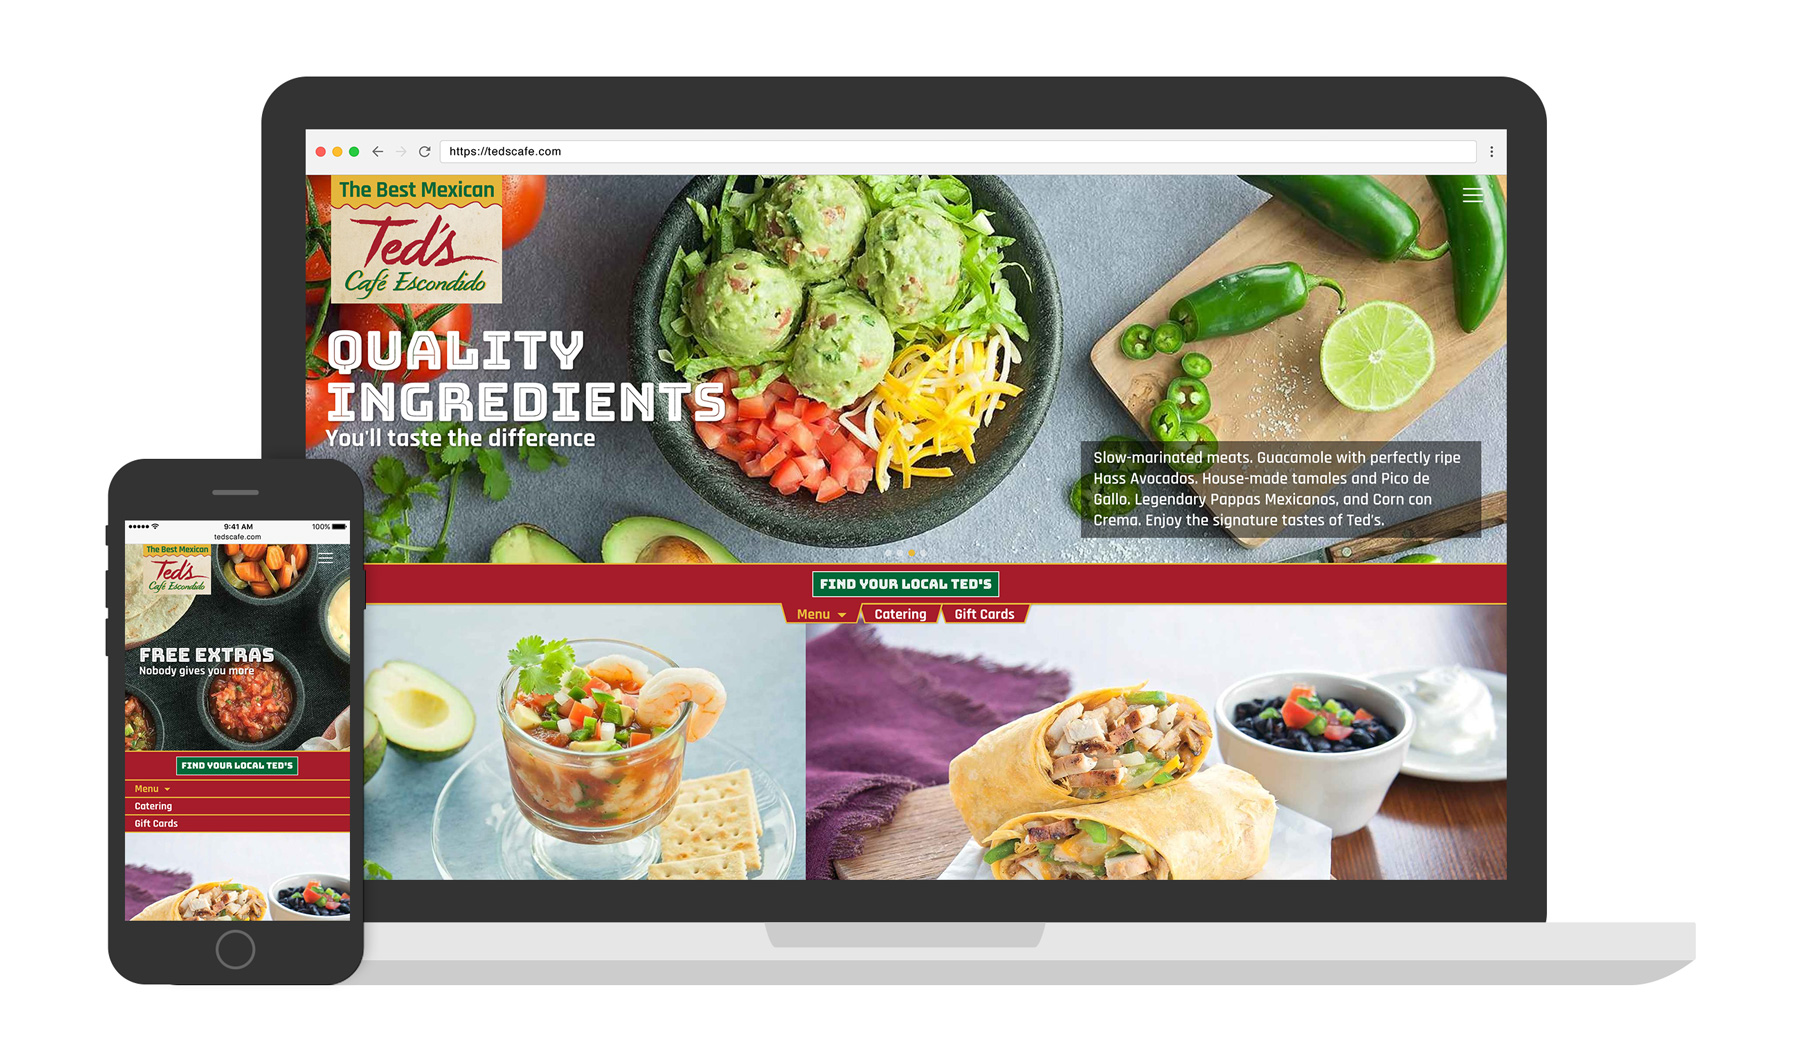 Teds Cafe Escondido Website displayed on multiple devices